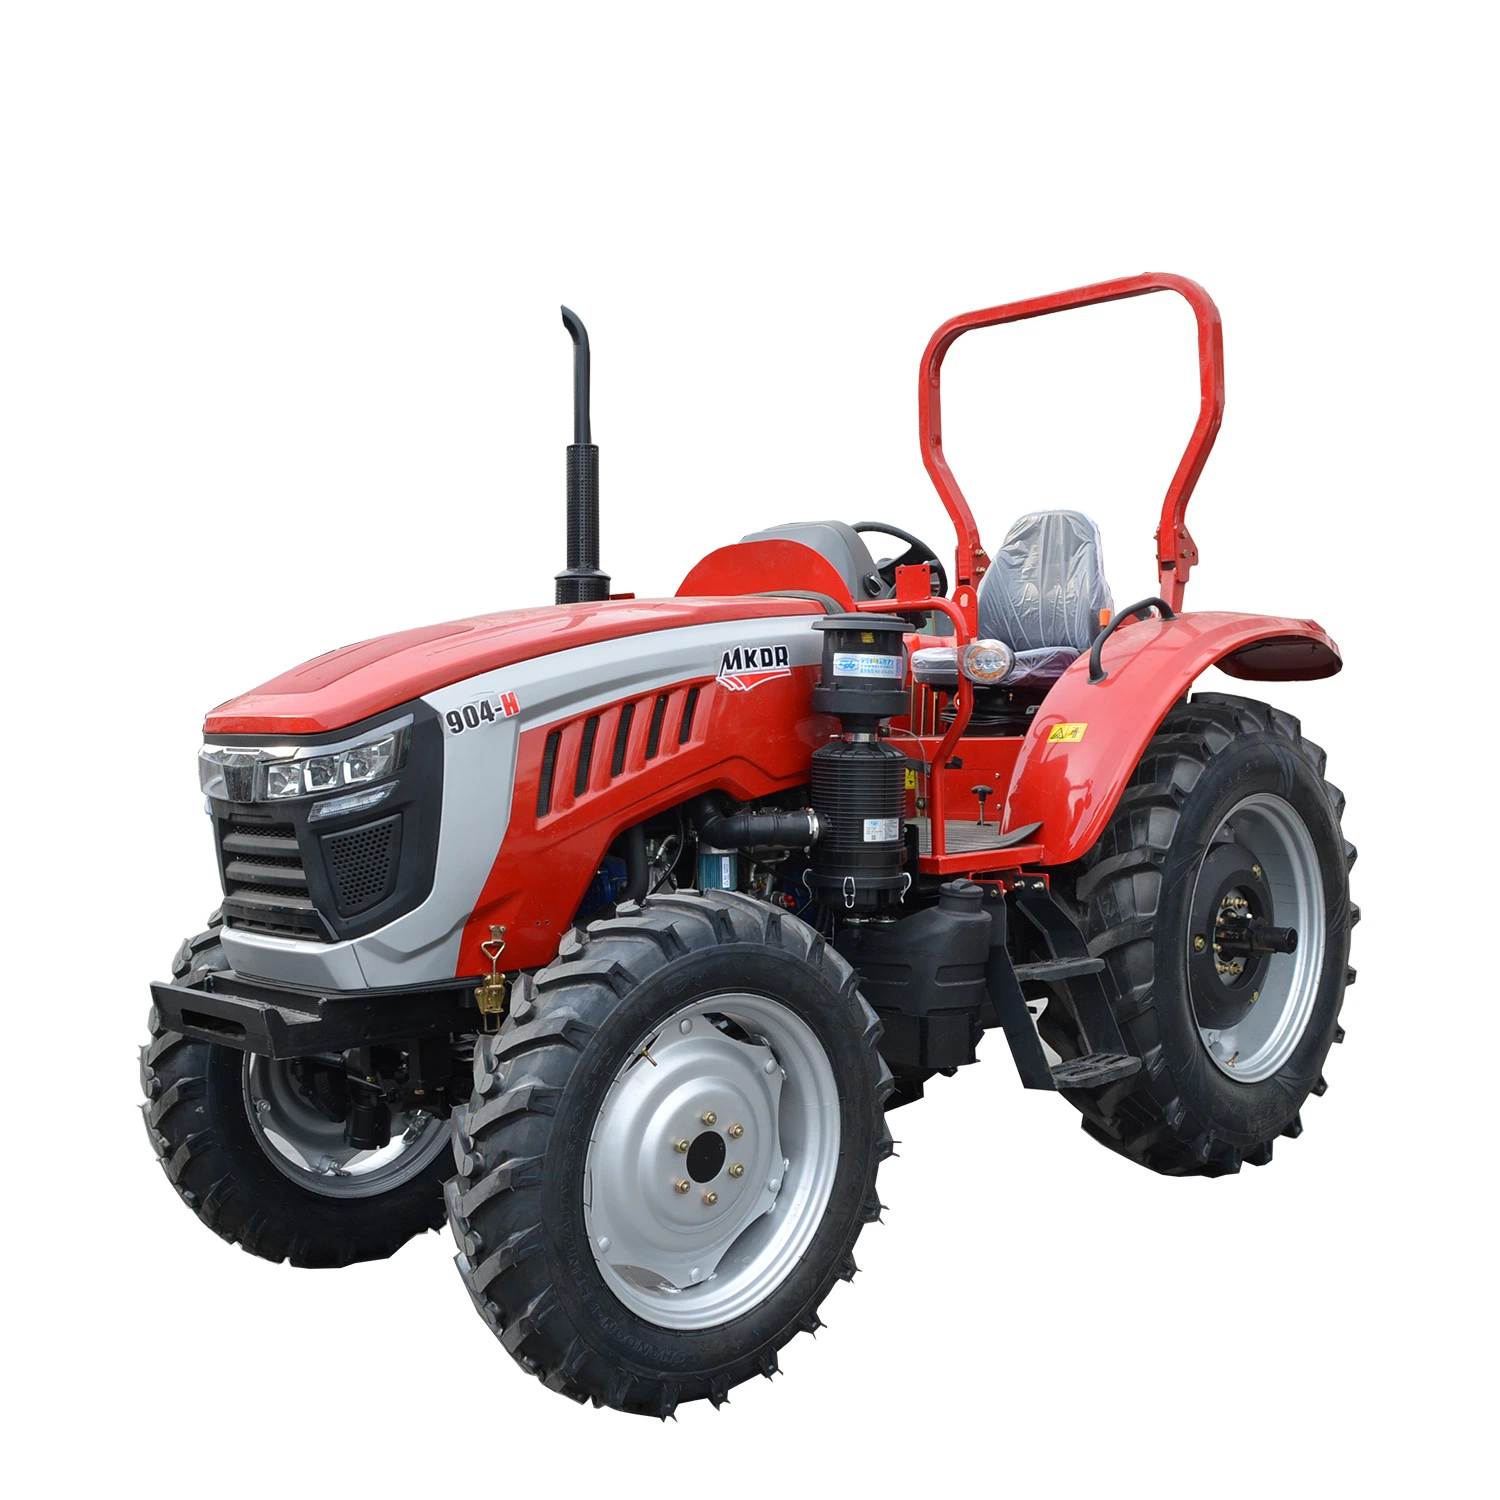 Buy Cheap Made in China Price Agricultura Tractores Mini Tractors 4X4 Cheap Small 4WD Farming Tractors Garden Tractor for Sale